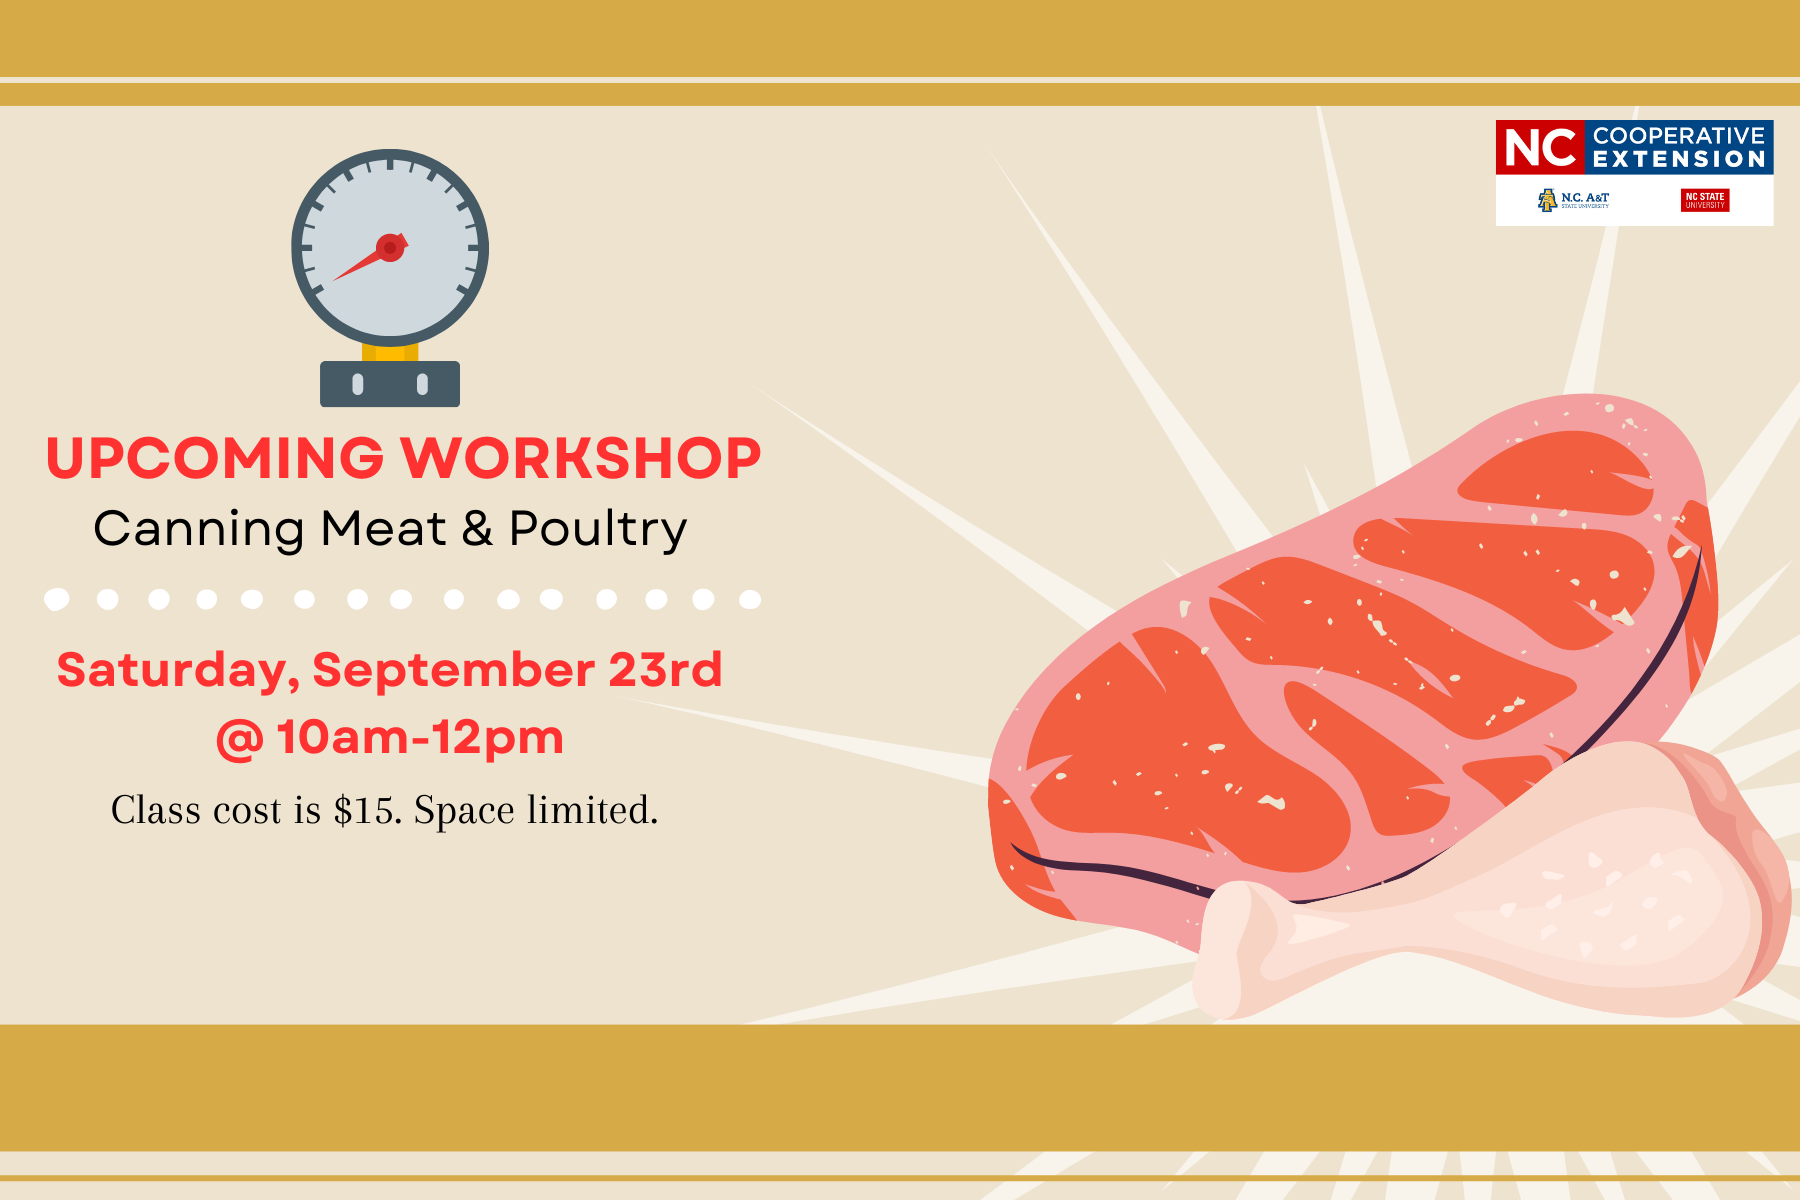 UPCOMING WORKSHOP Canning Meat & Poultry Saturday, September 23rd @ 10 a.m.-12 p.m. Class cost is $15. Space limited.